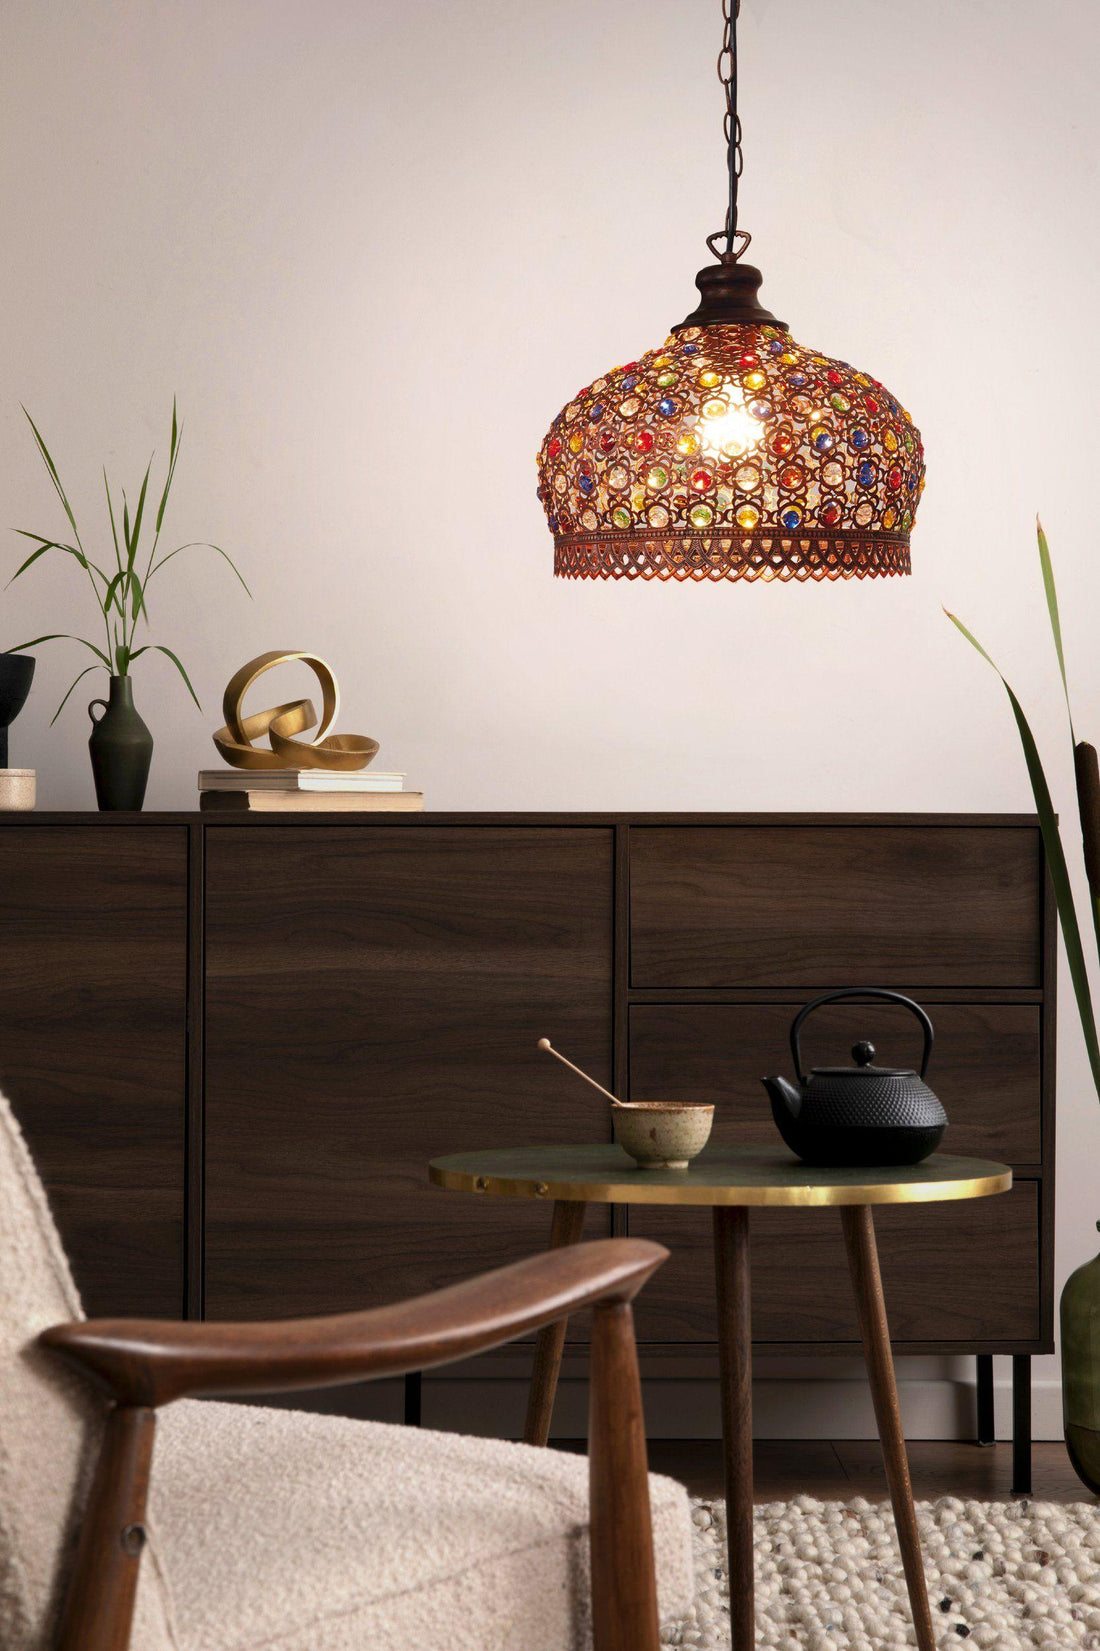 JADIDA Pendant Light by The Light Library